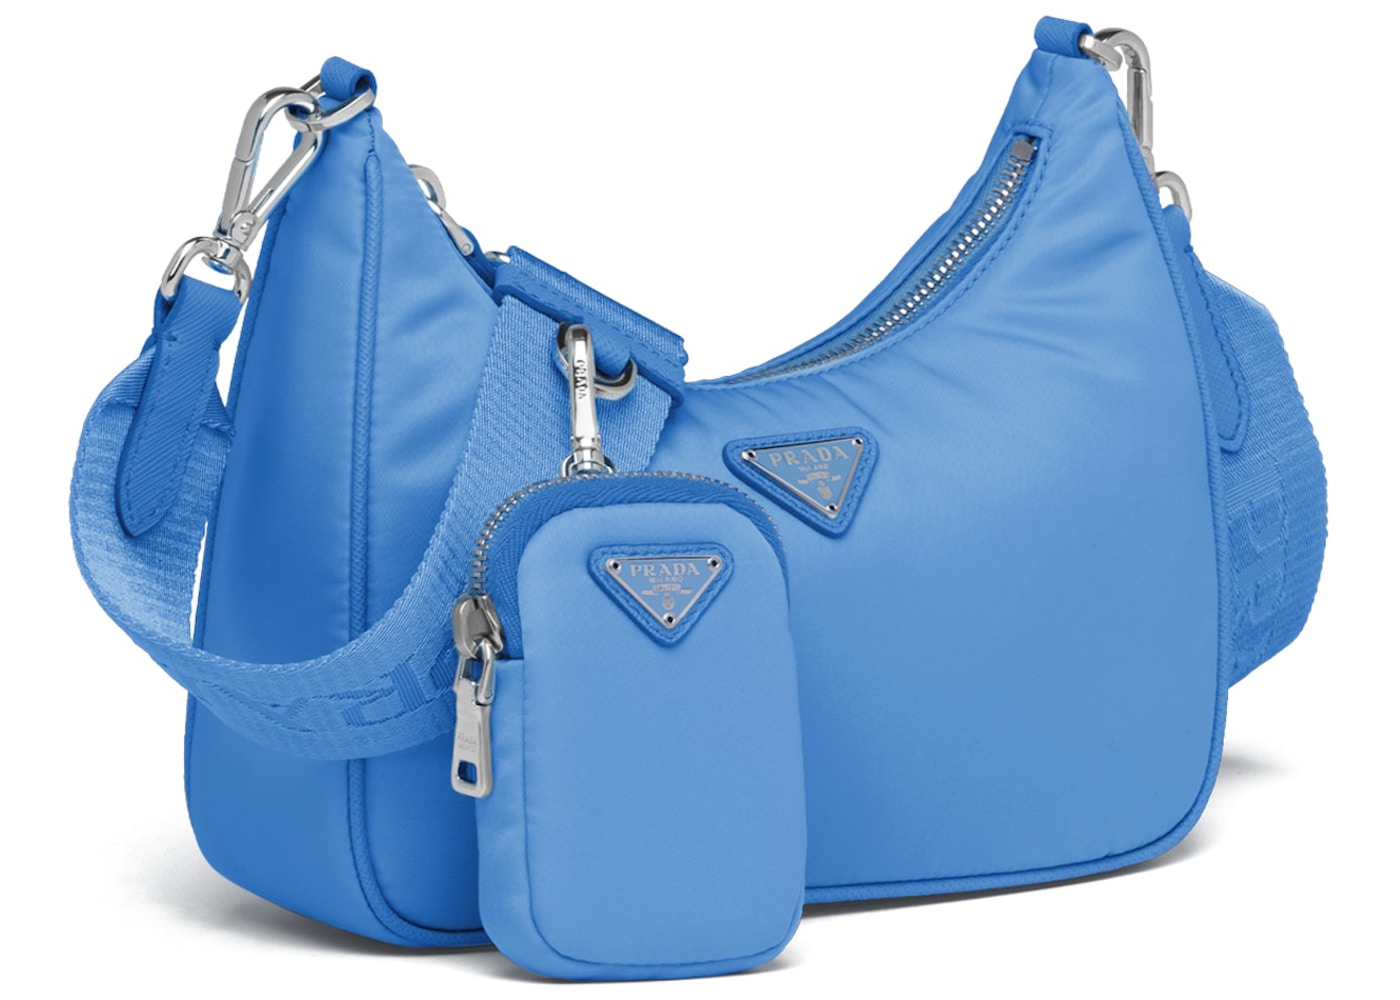 Prada Re-Edition 2005 Shoulder Bag Nylon Periwinkle Blue in Nylon with